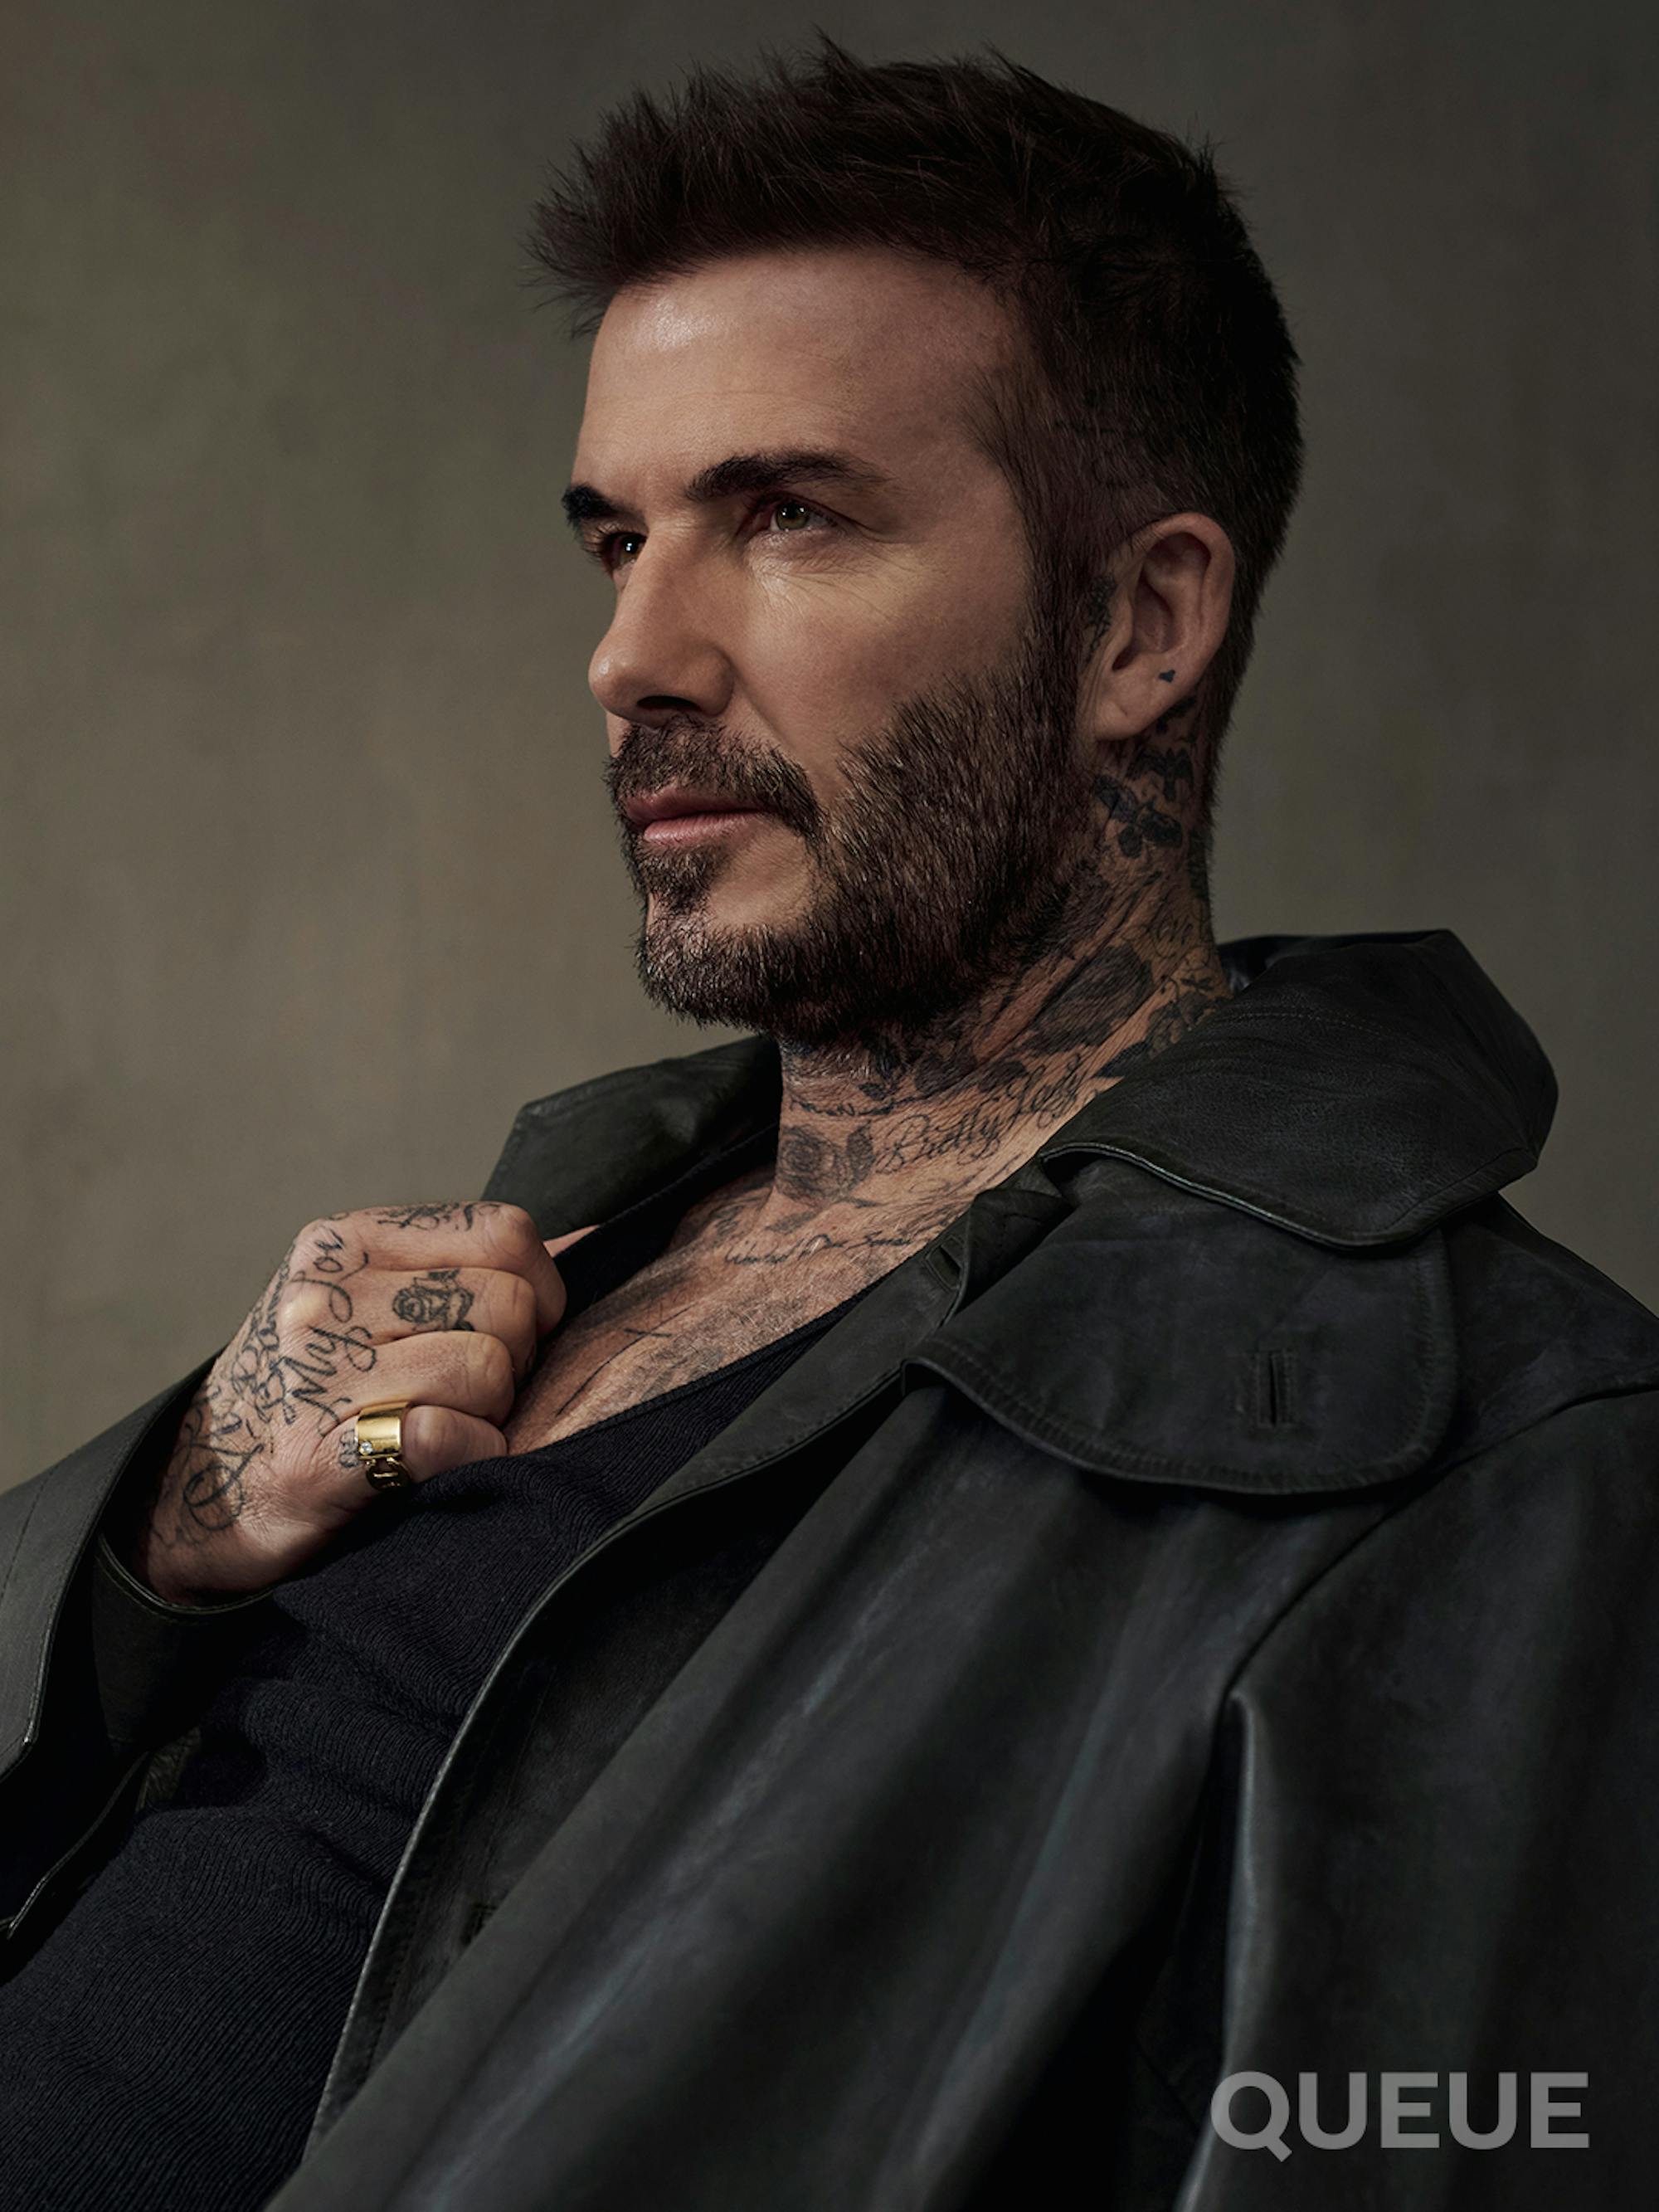 David Beckham wears a black jacket and looks off into the distance.